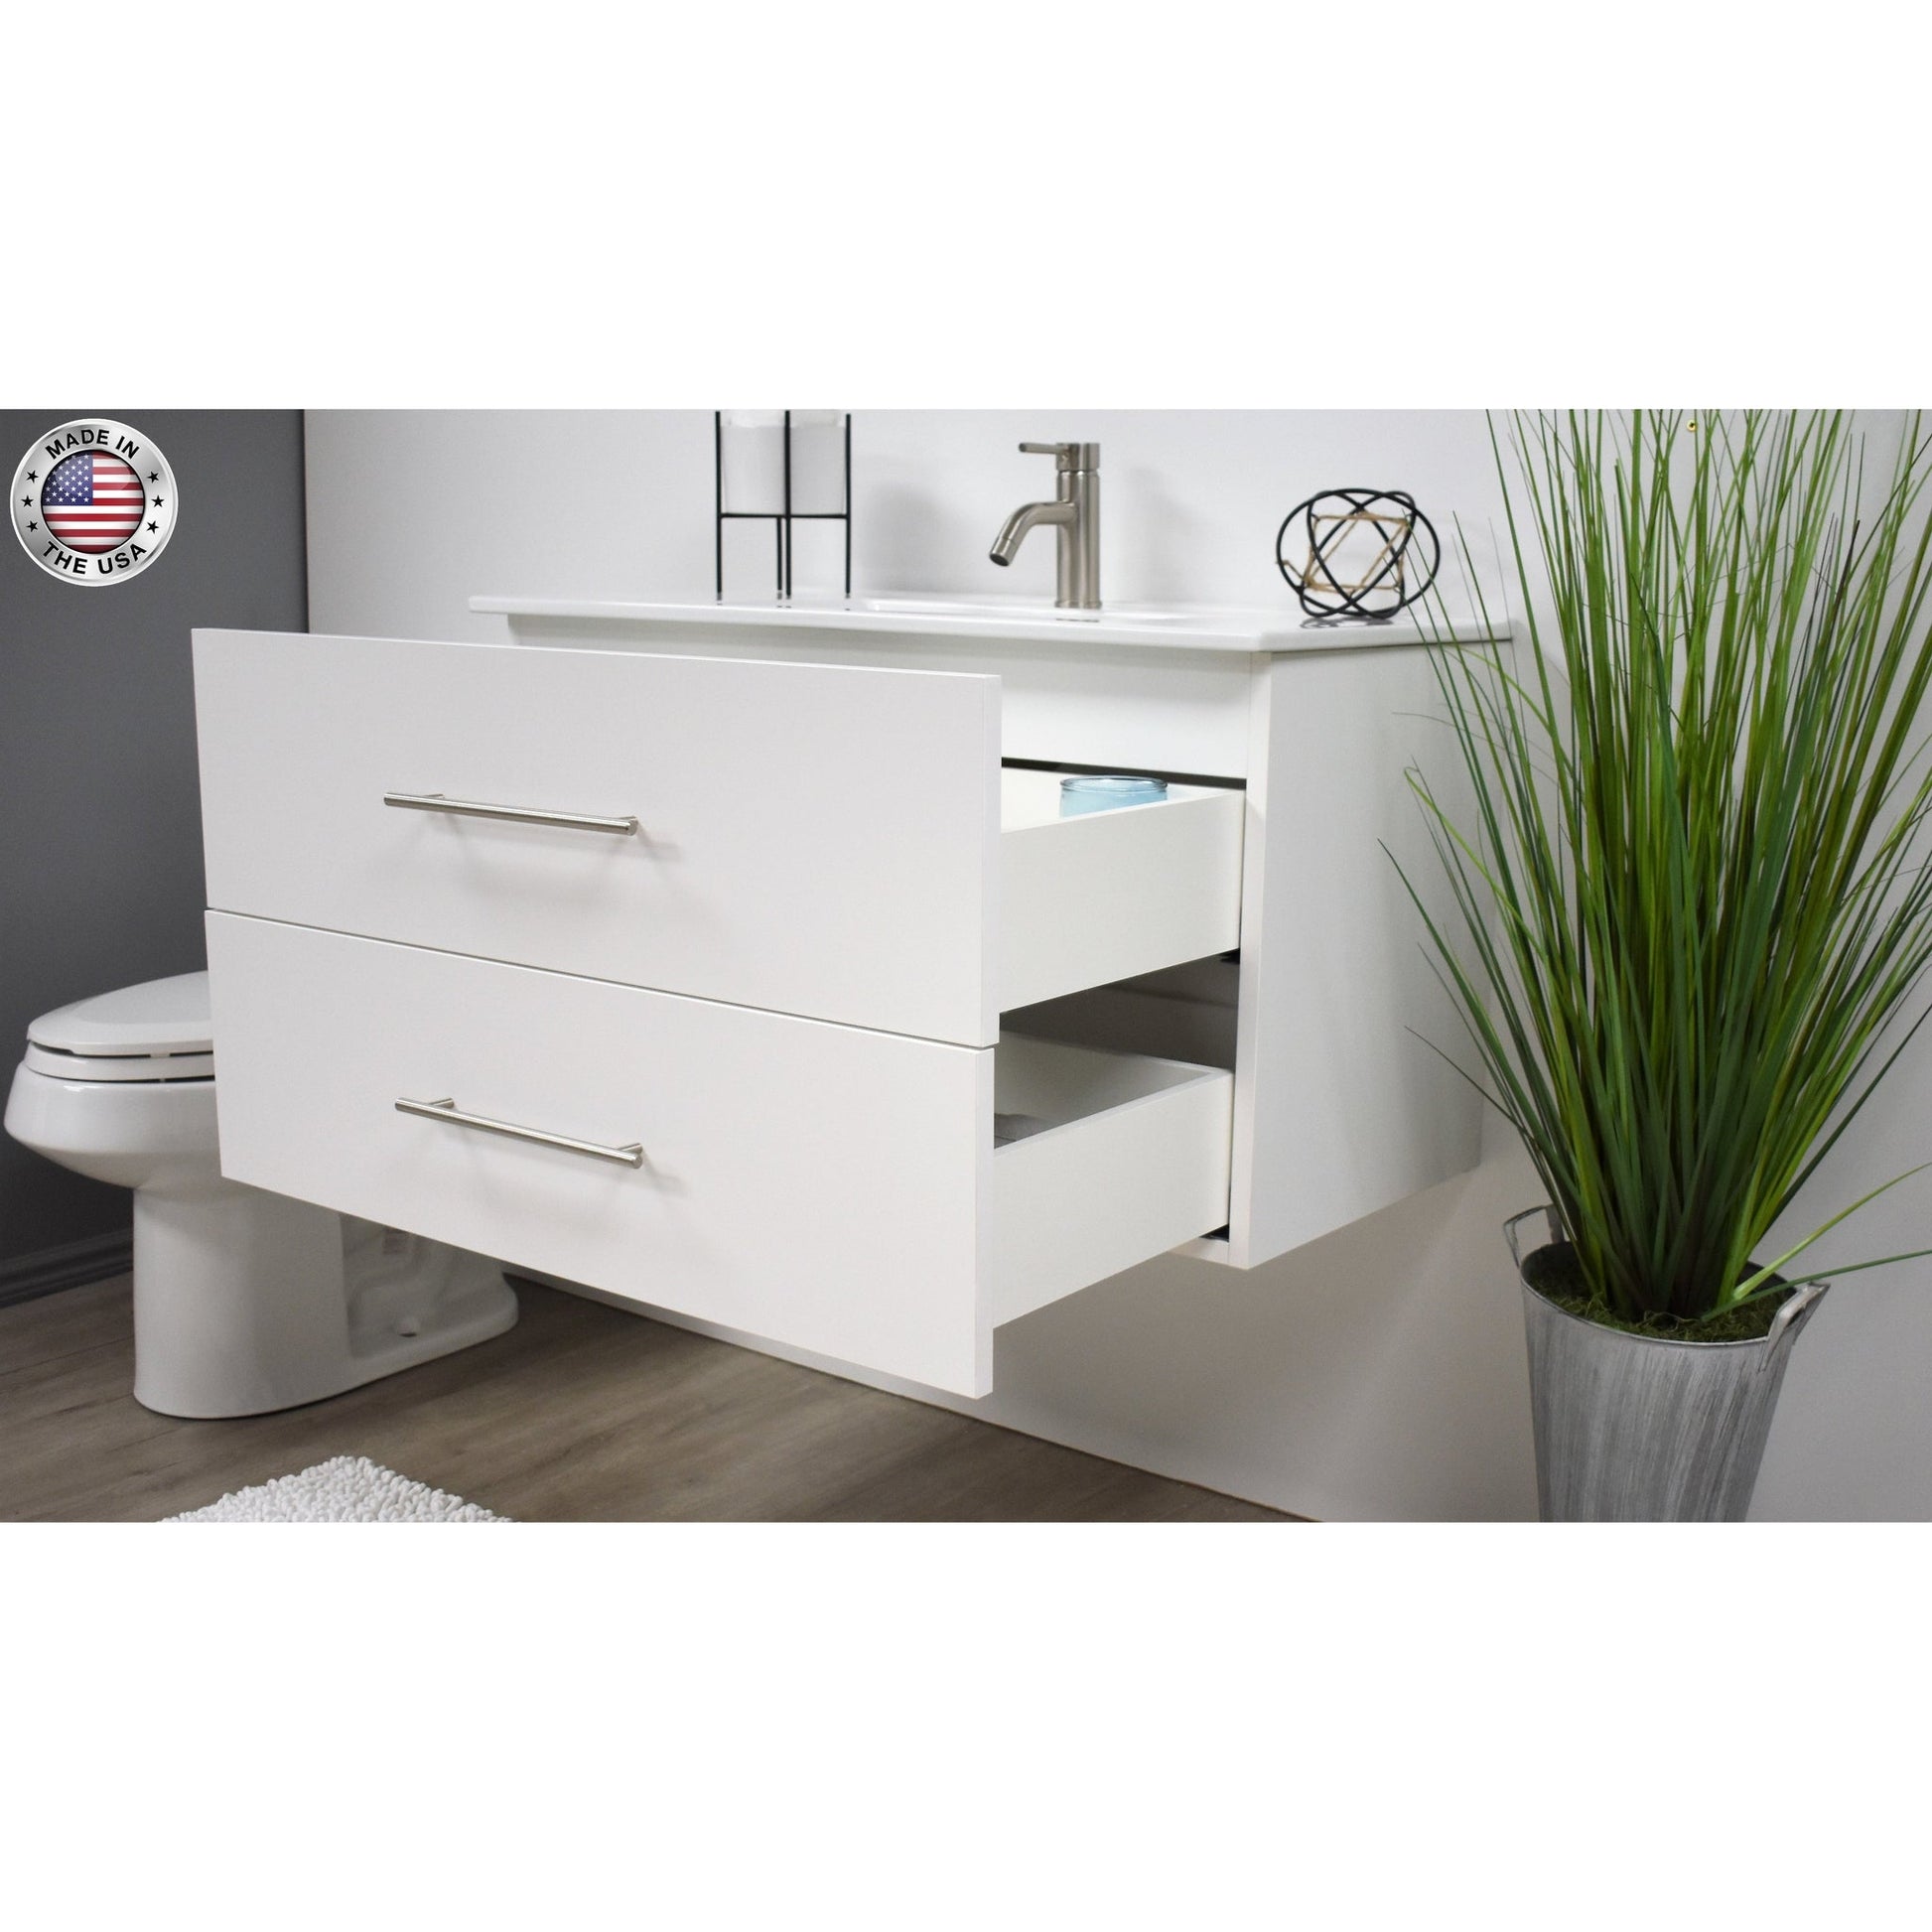 Volpa USA Napa 36" White Wall-Mounted Floating Modern Bathroom Vanity With Integrated Ceramic Top and Satin Nickel Round Handles